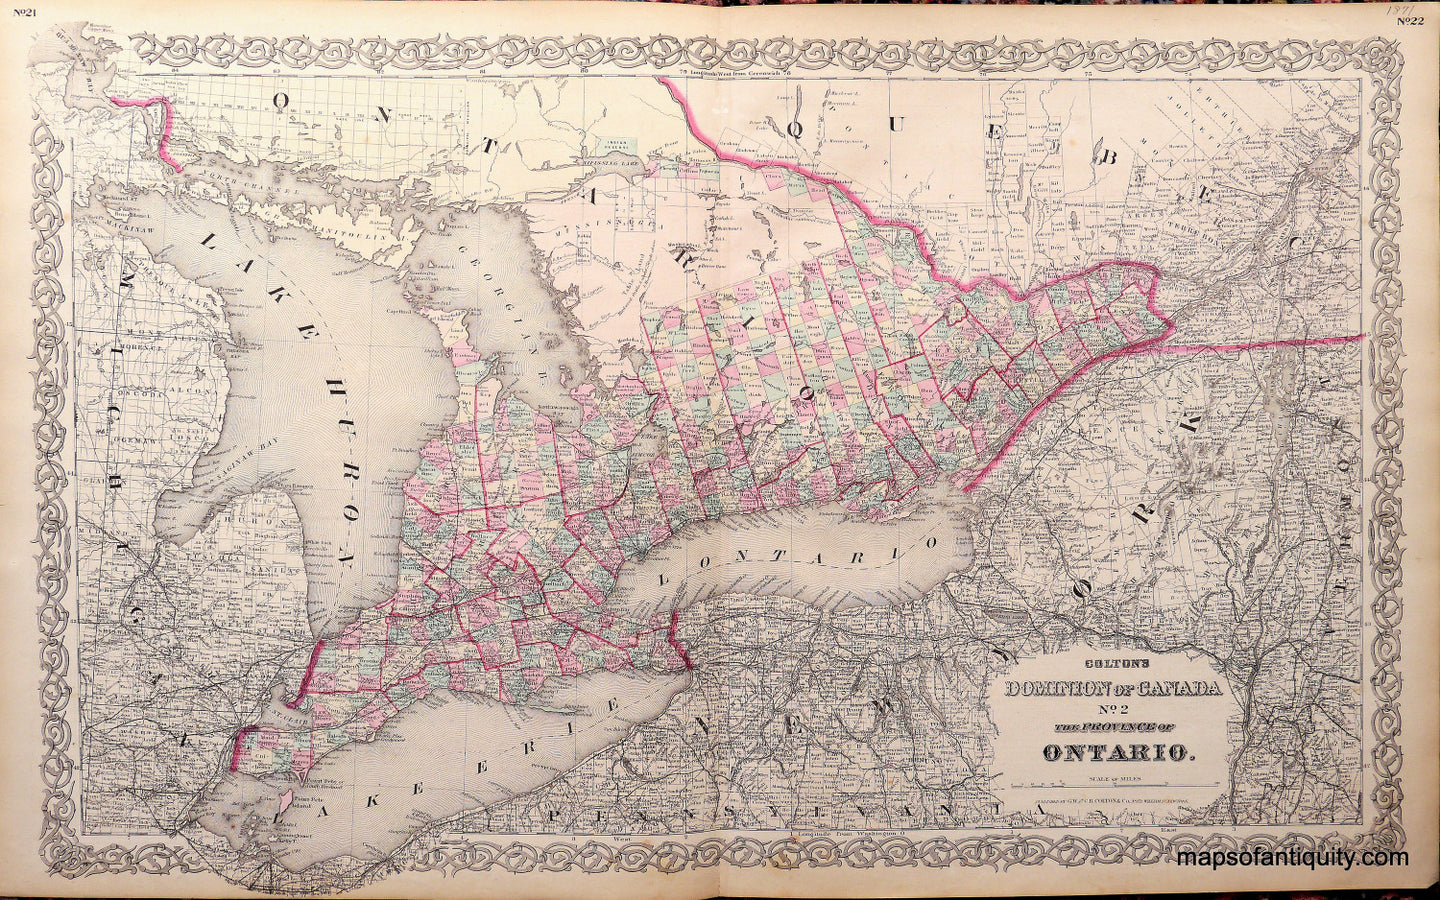 Antique-Hand-Colored-Map-Colton's-Dominion-of-Canada-No.-2-The-Province-of-Ontario.-Canada--1871-Colton-Maps-Of-Antiquity